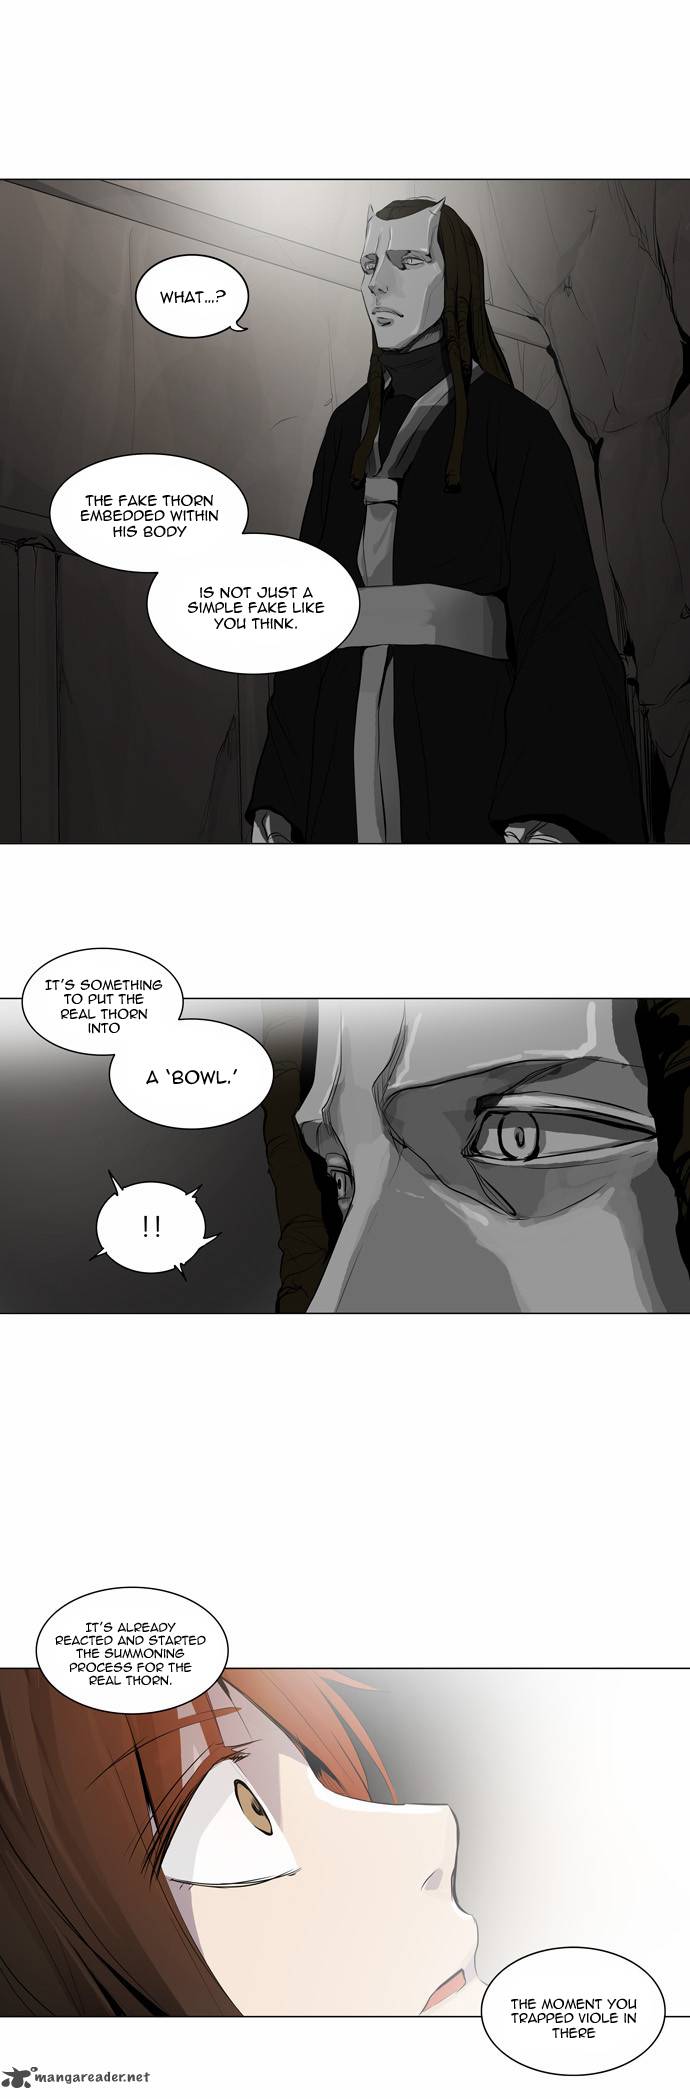 Tower Of God 170 11